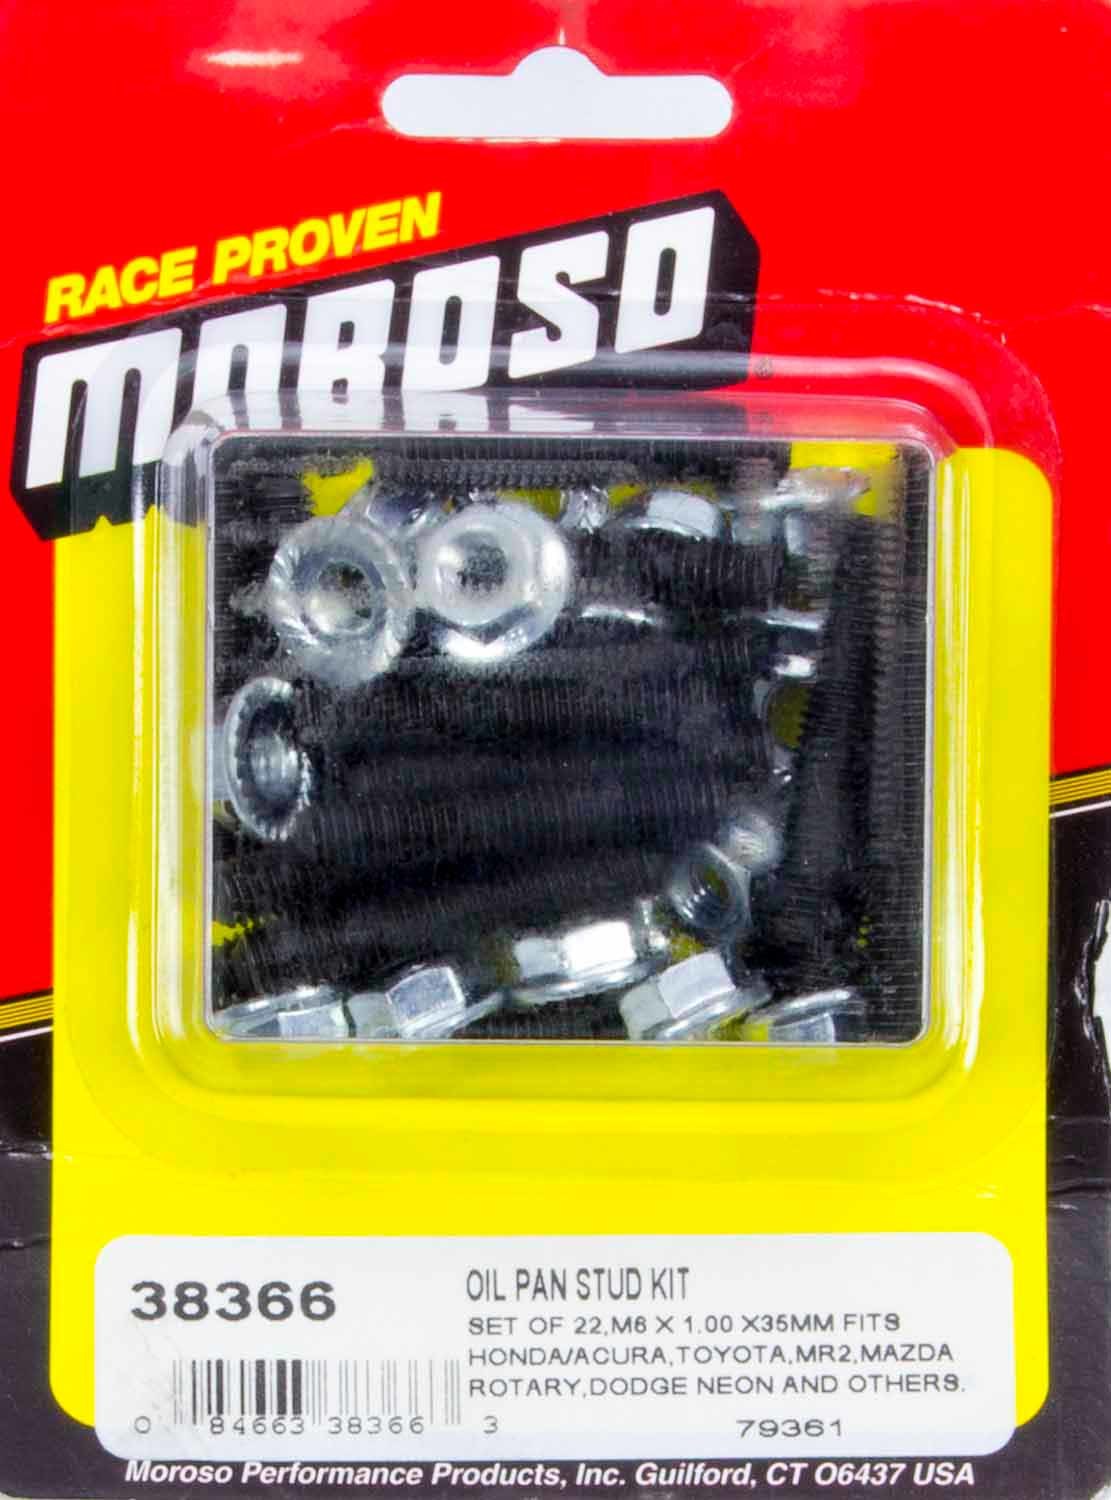 Moroso 38366 Oil Pan Stud, Serrated Face Nuts, 6 mm x 1.00 x 35 mm, Steel, Black Oxide, Various Applications, Set of 22